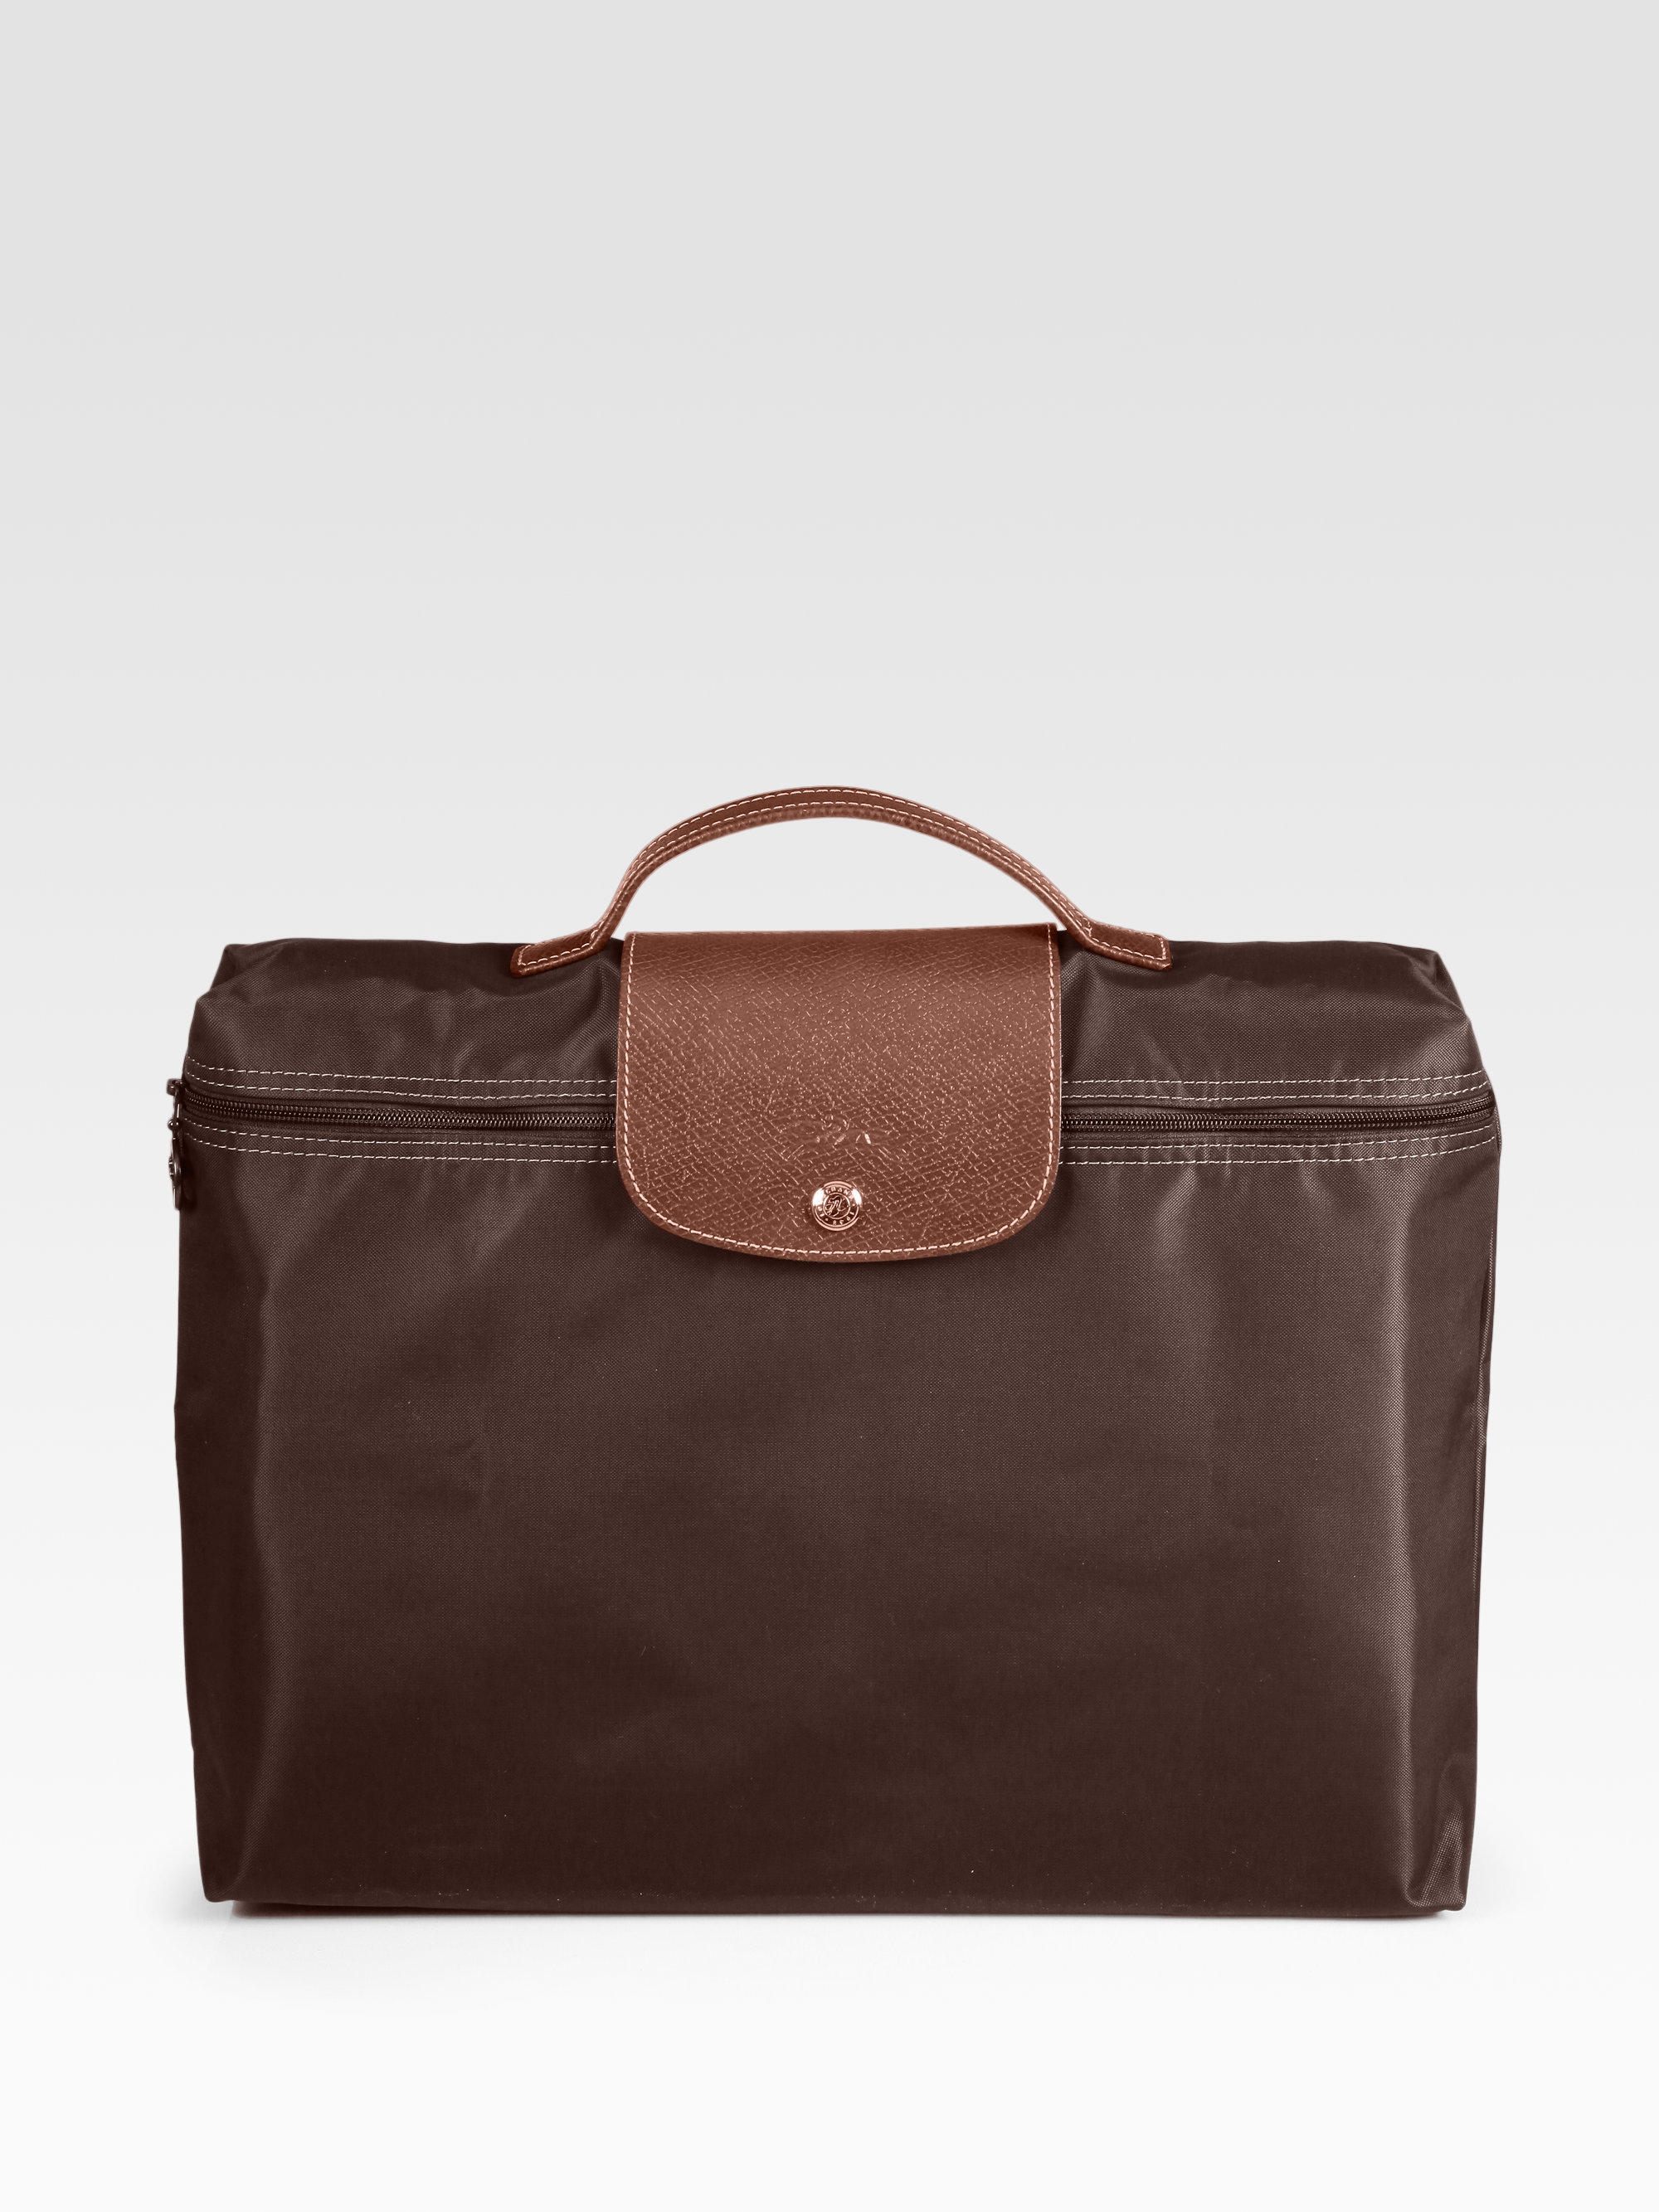 Lyst - Longchamp Pliage Briefcase in Brown for Men